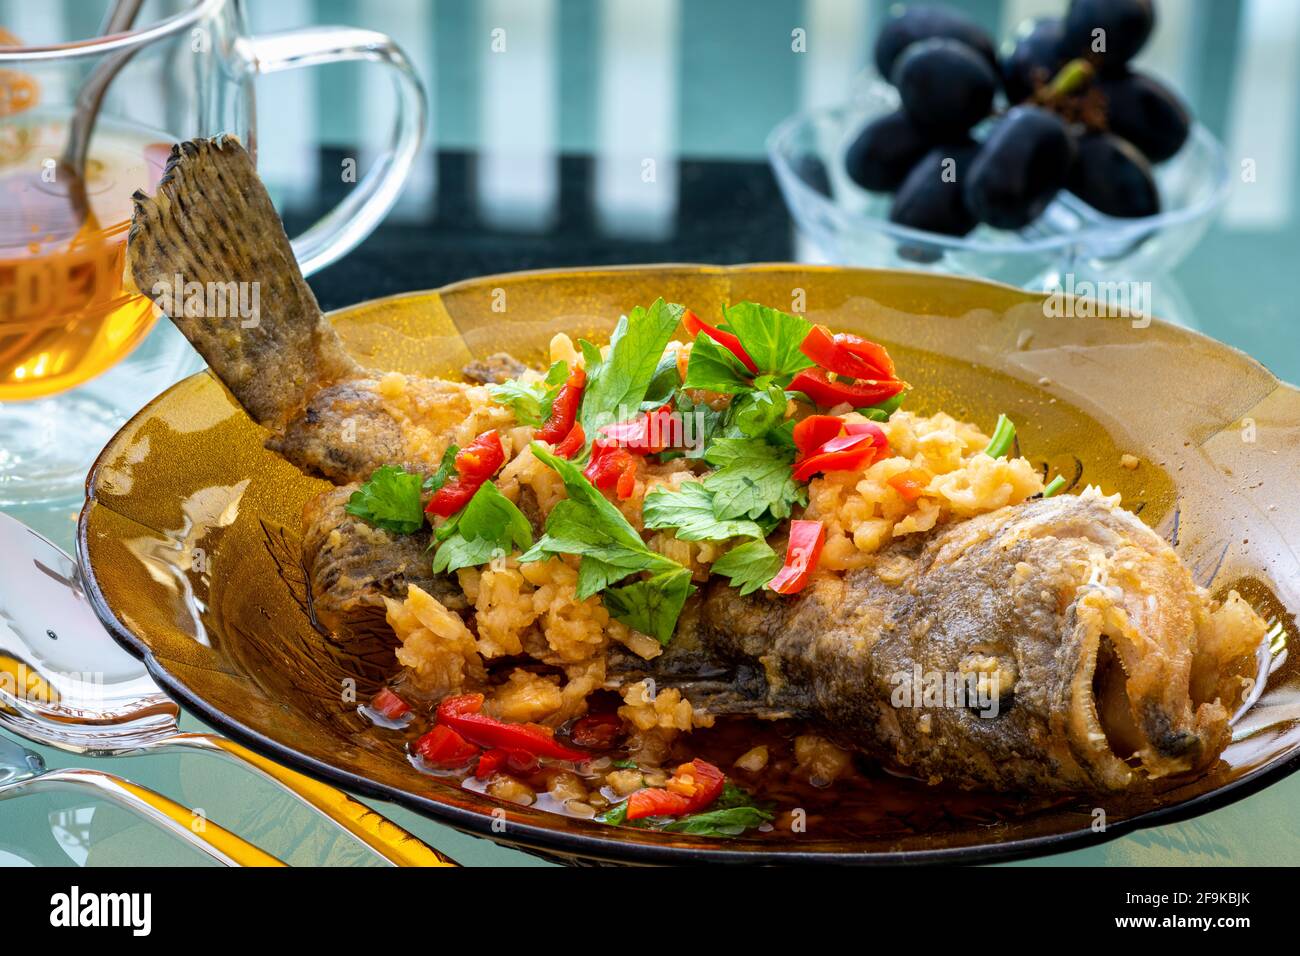 Fried grouper fish on a brown glass plate topped with condiments, Chinese cooking in Malaysia Stock Photo